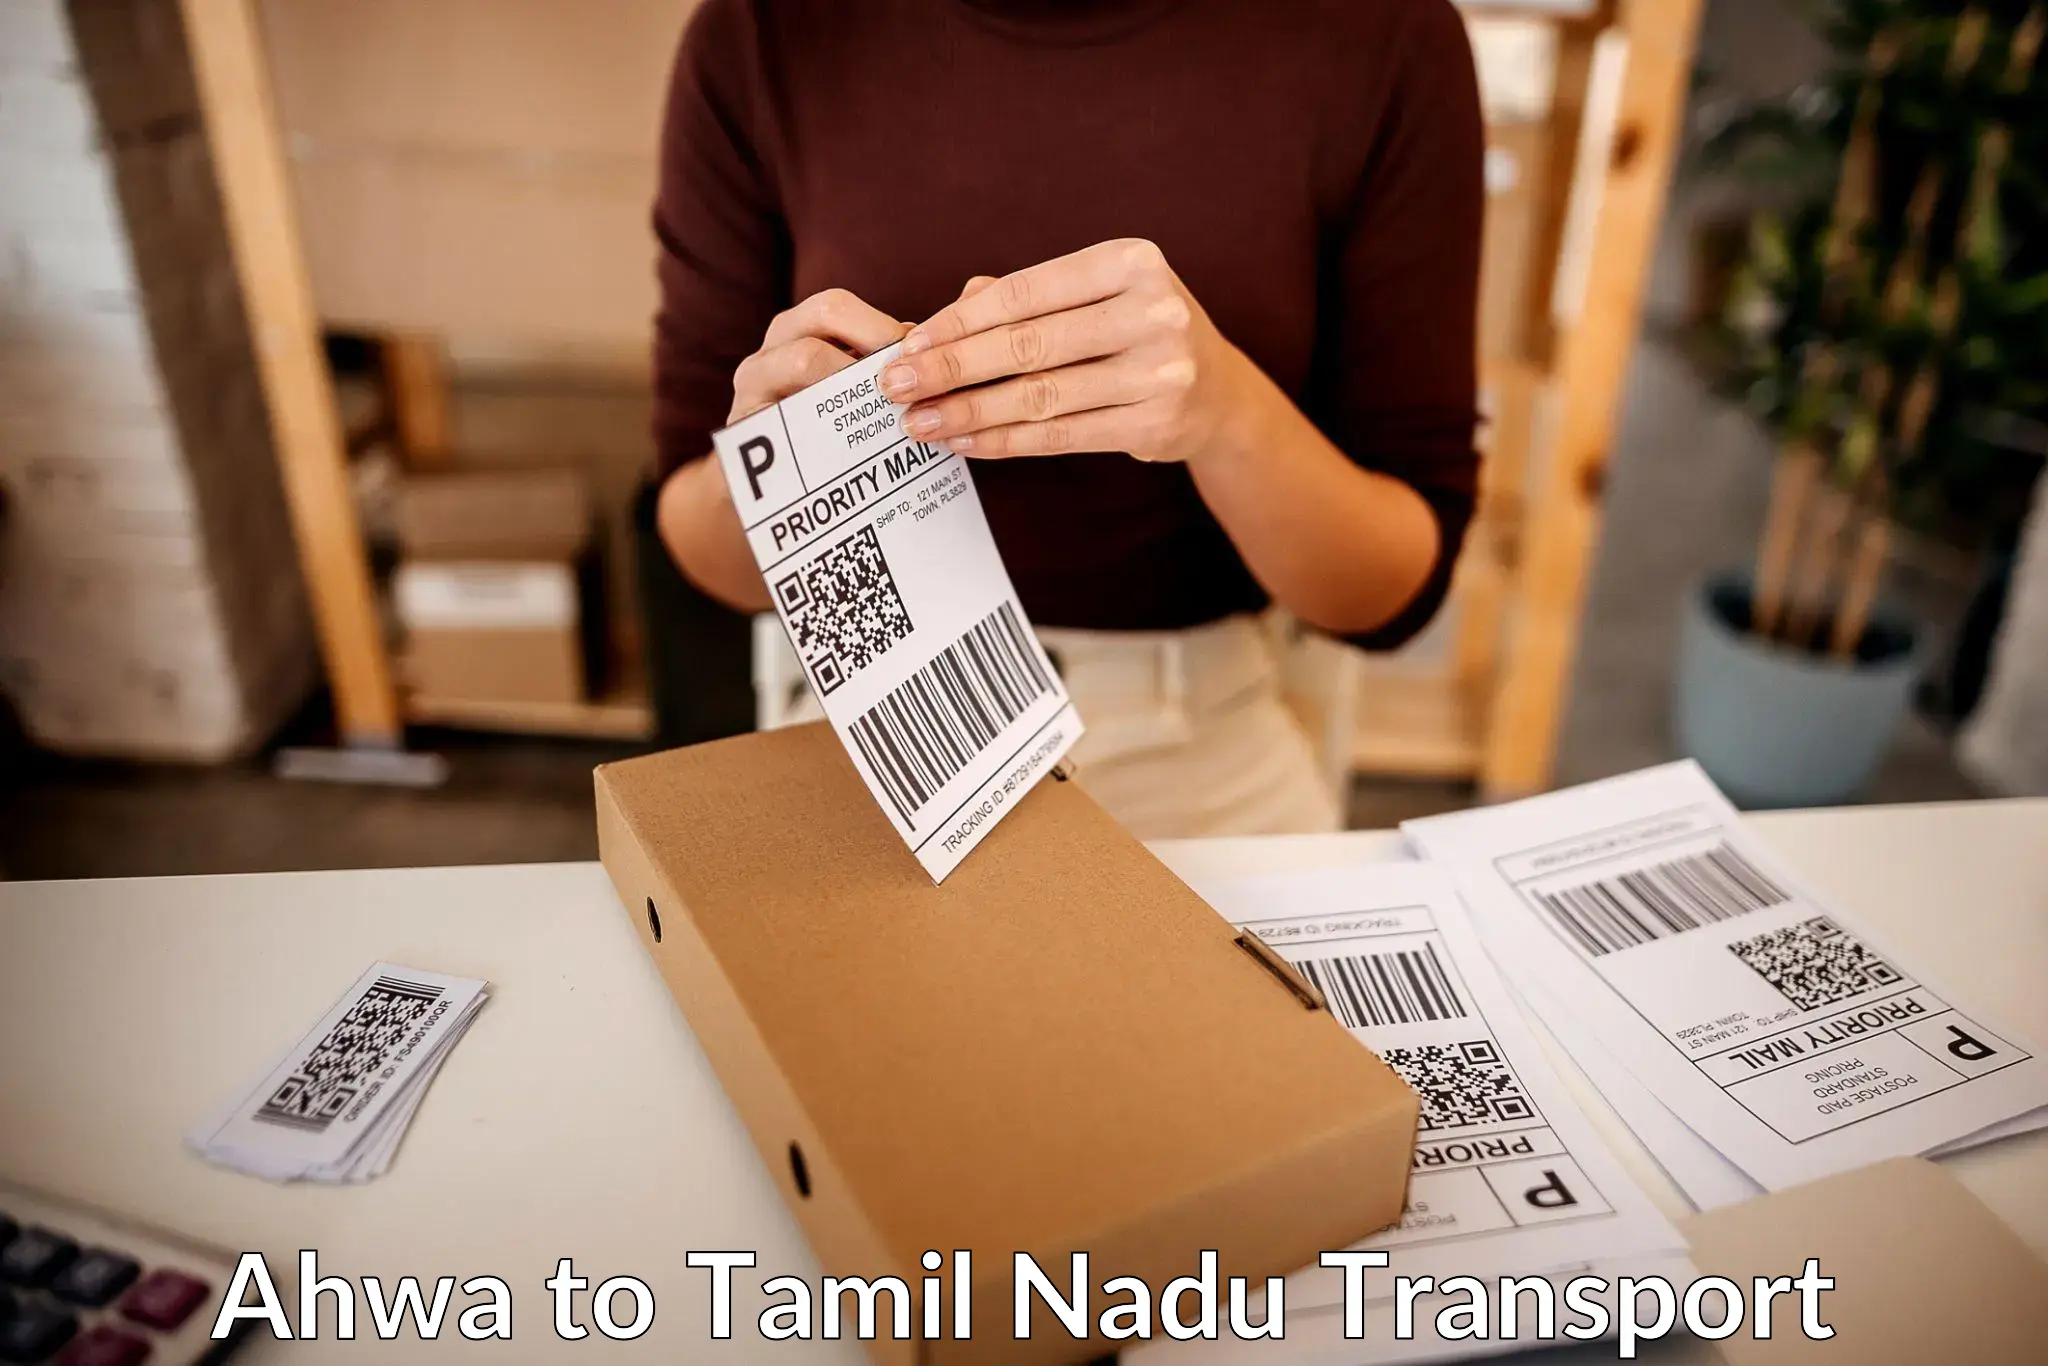 Cargo train transport services Ahwa to Tamil Nadu